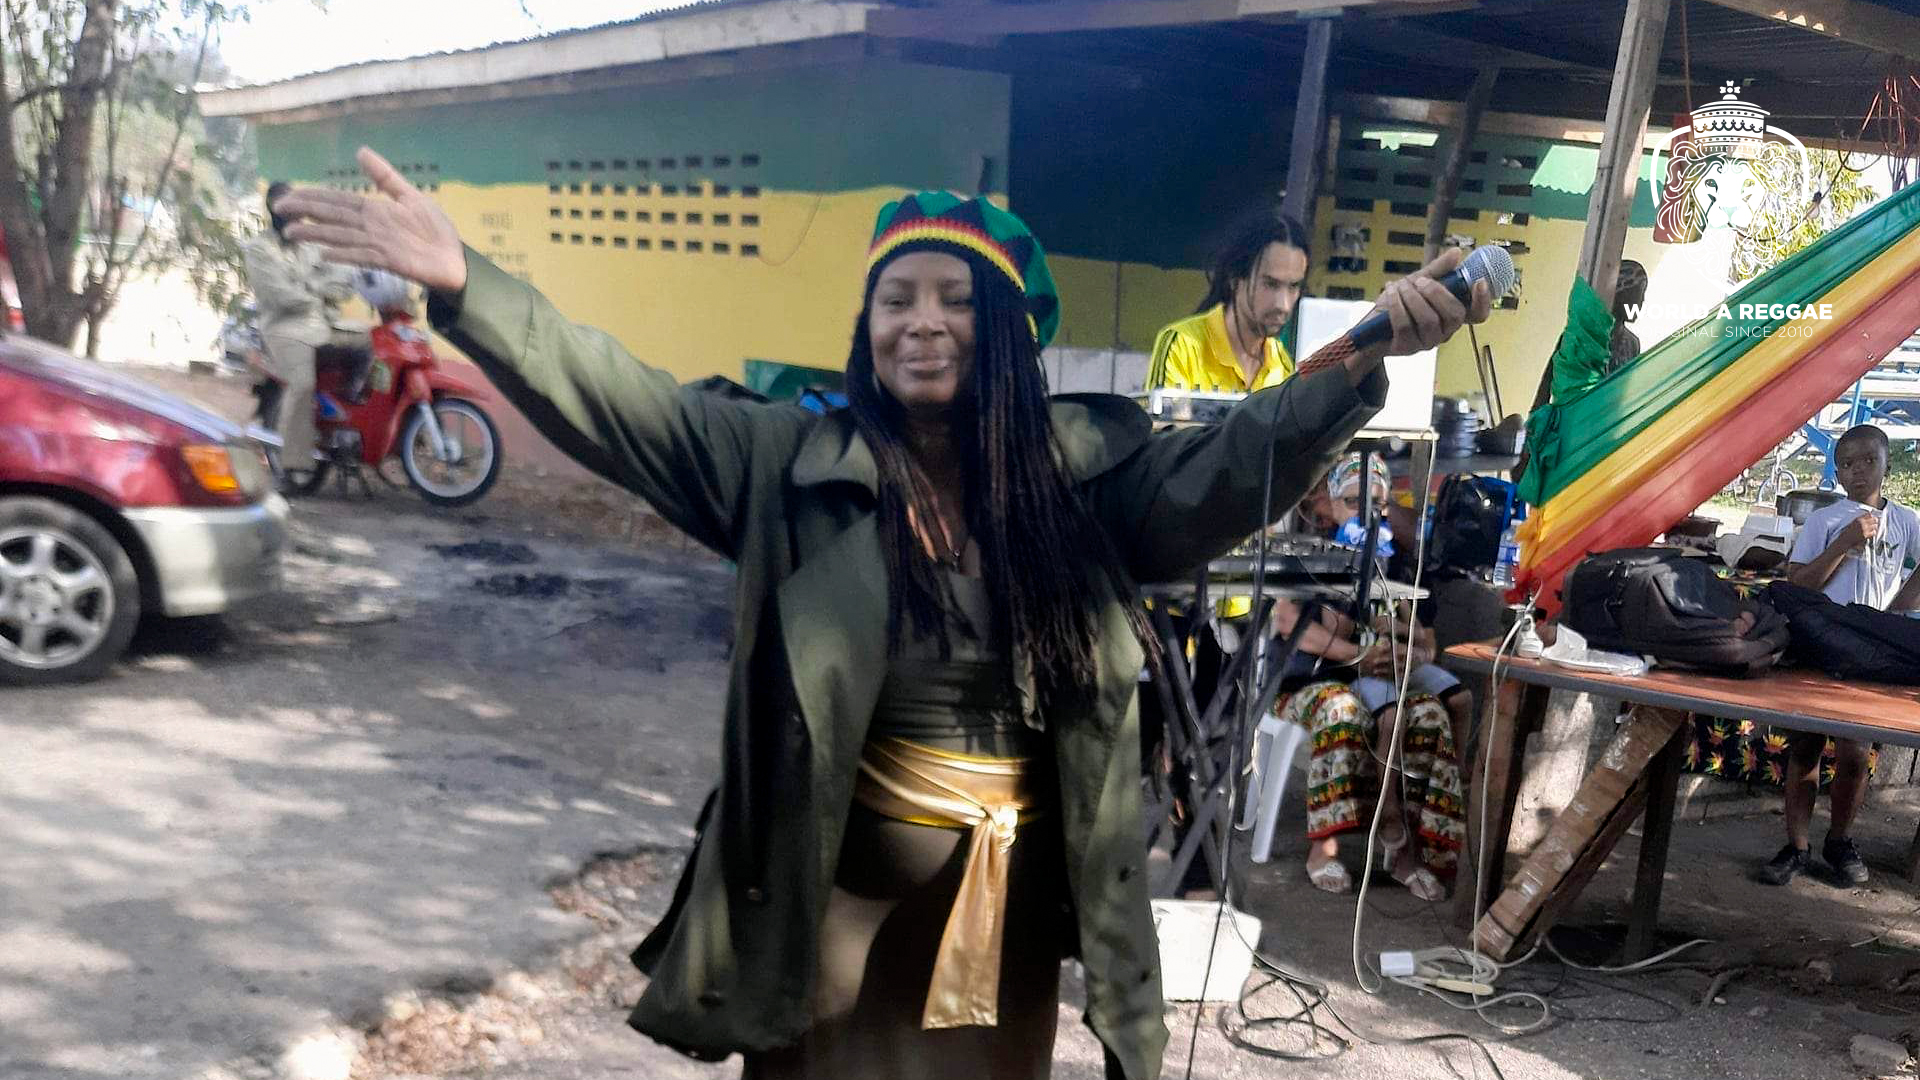 KINGSTON CITY, PETER TOSH TRIBUTE, TODAY, FEBRUARY 23, AT HOUSE OF DREAD DEANERY ROAD